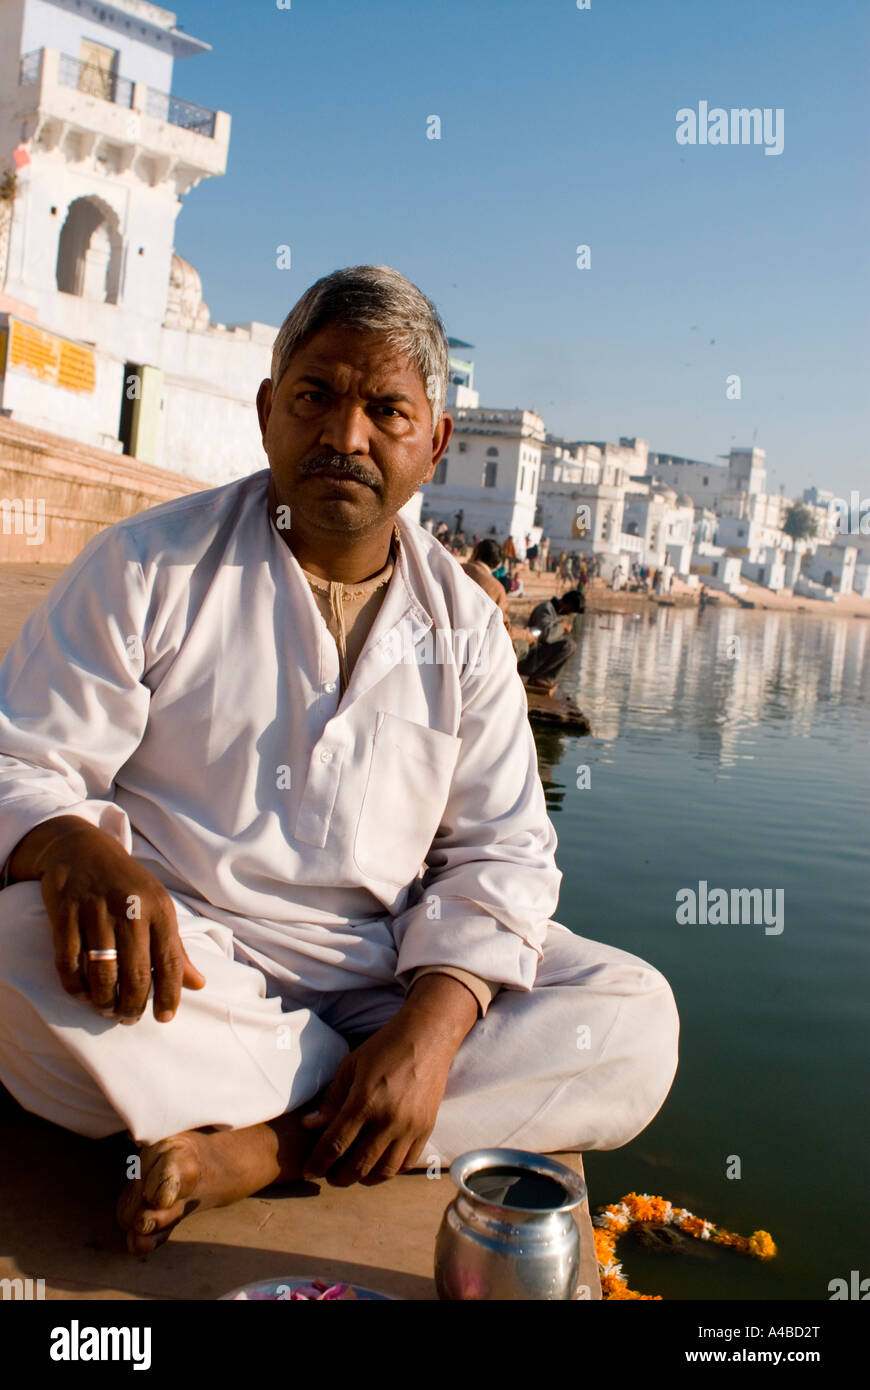 Stock image of Brahmin priest on the bathing ghats at the hindu holy city of Pushkar Rajasthan India making prayers and pooja Stock Photo